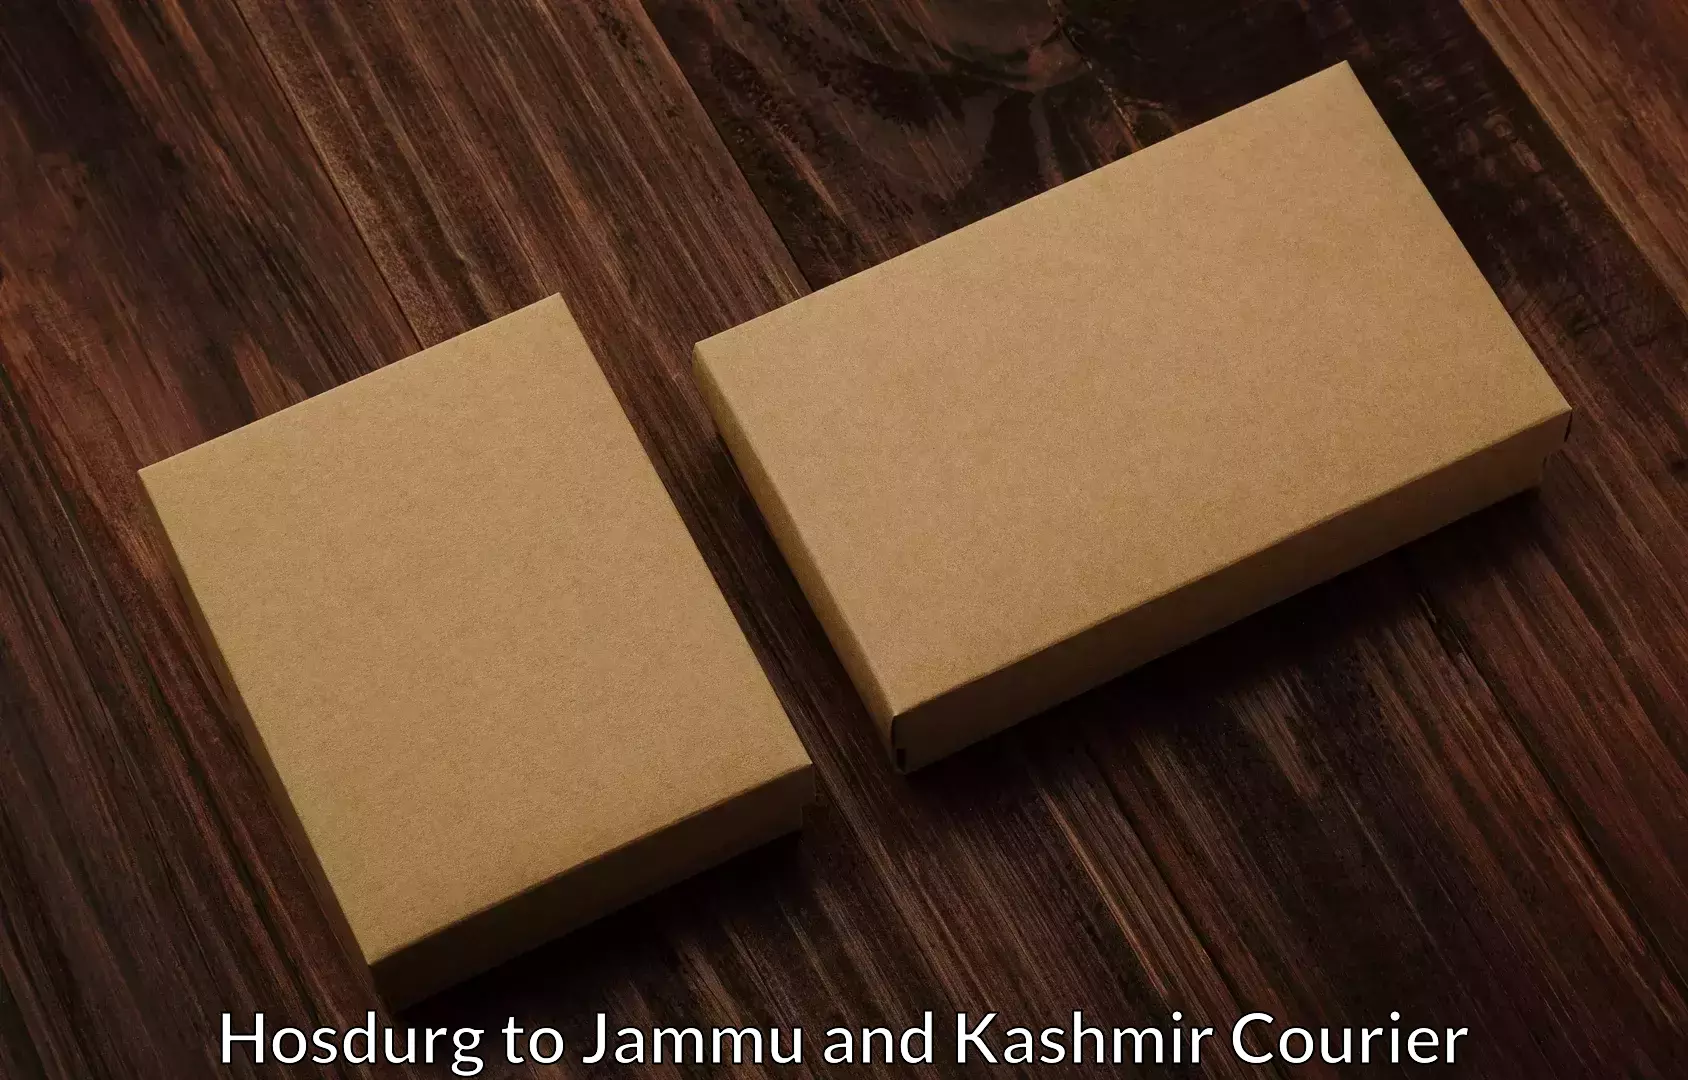 Efficient relocation services in Hosdurg to Jammu and Kashmir